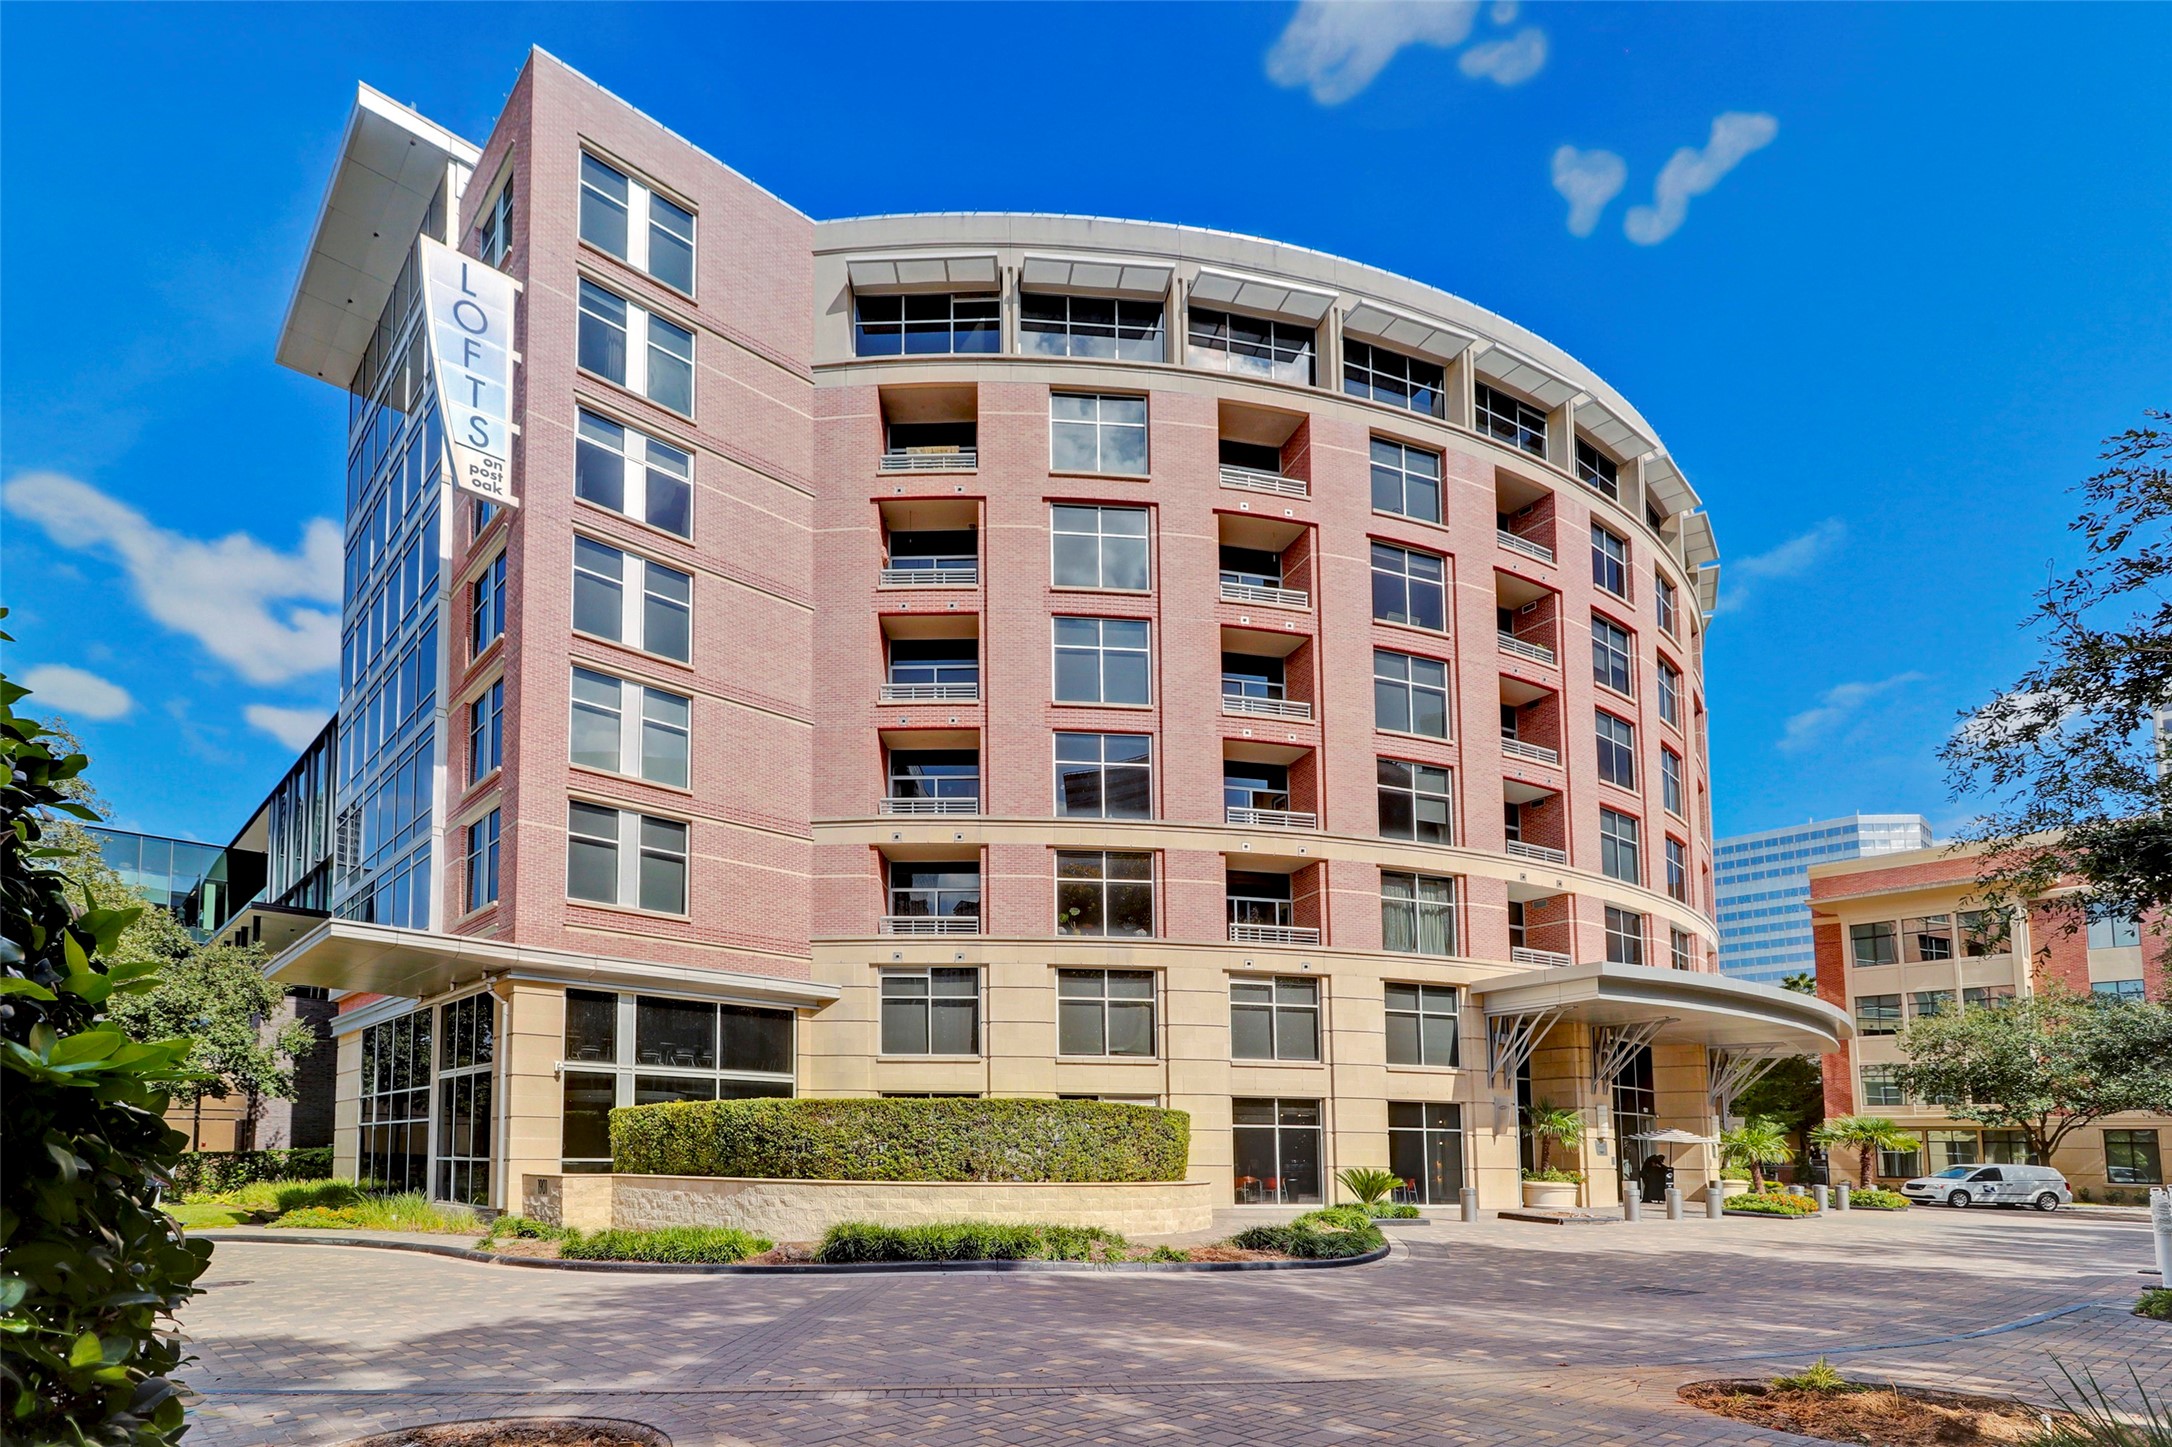 Situated in the heart of the Galleria district, the Lofts on Post Oak enjoys proximity to high-end shopping, fine dining, and cultural attractions. The address itself is prestigious, reflecting the exclusive nature of the residence.